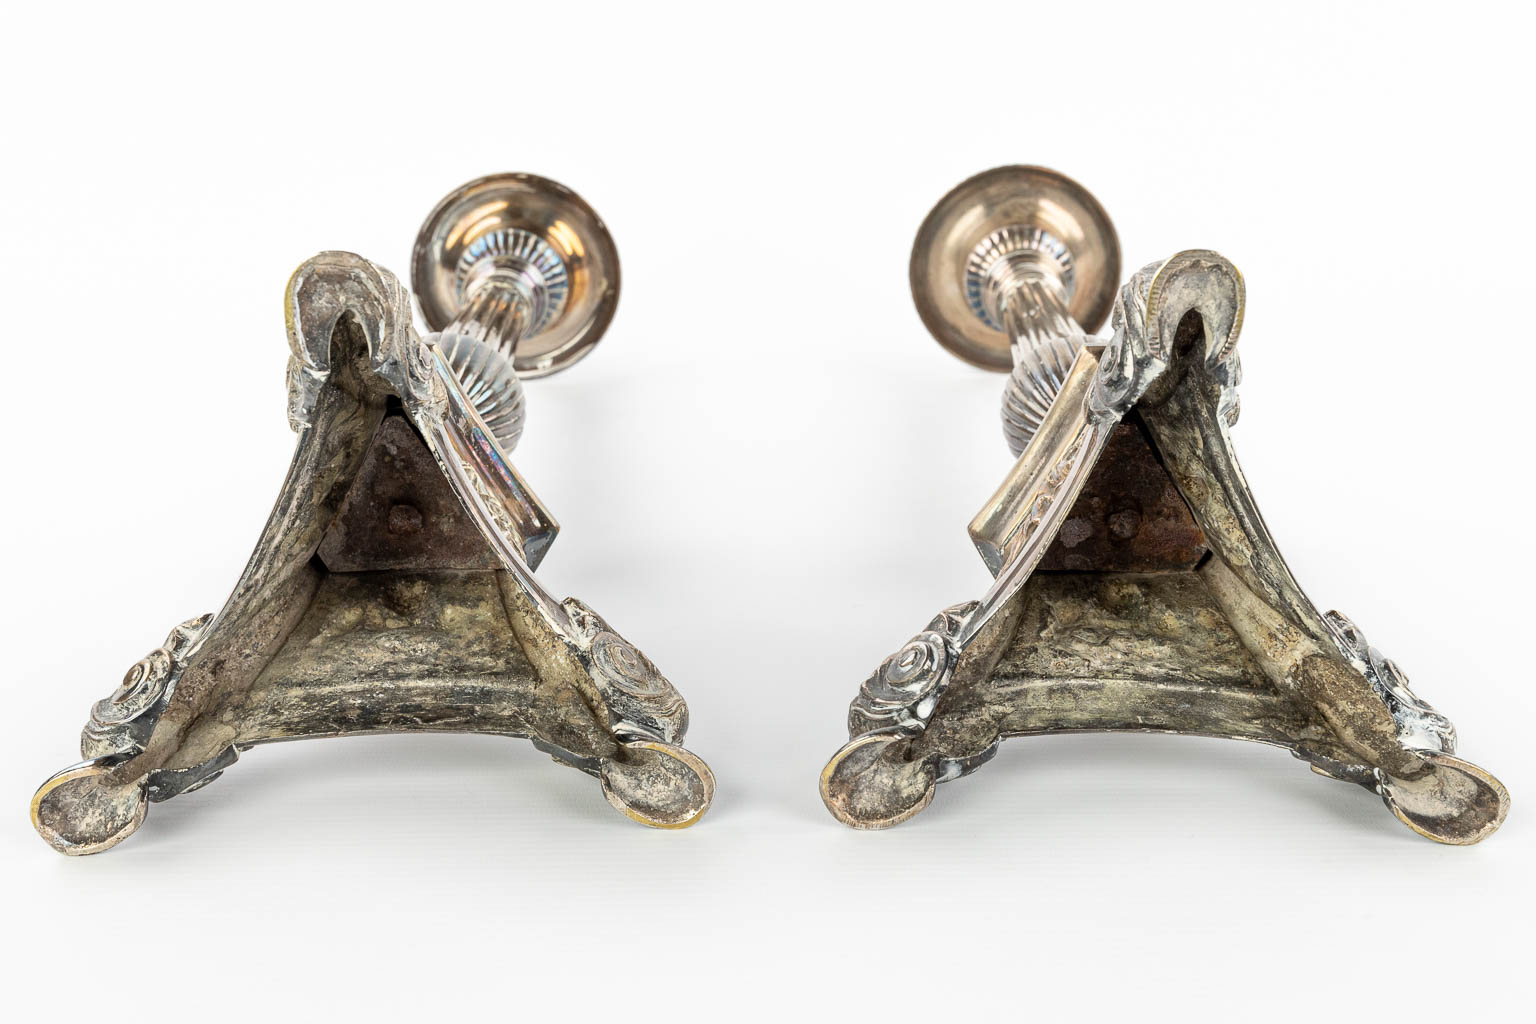 A pair of silver-plated candlesticks decorated with images of holy figurines. (H:59cm)